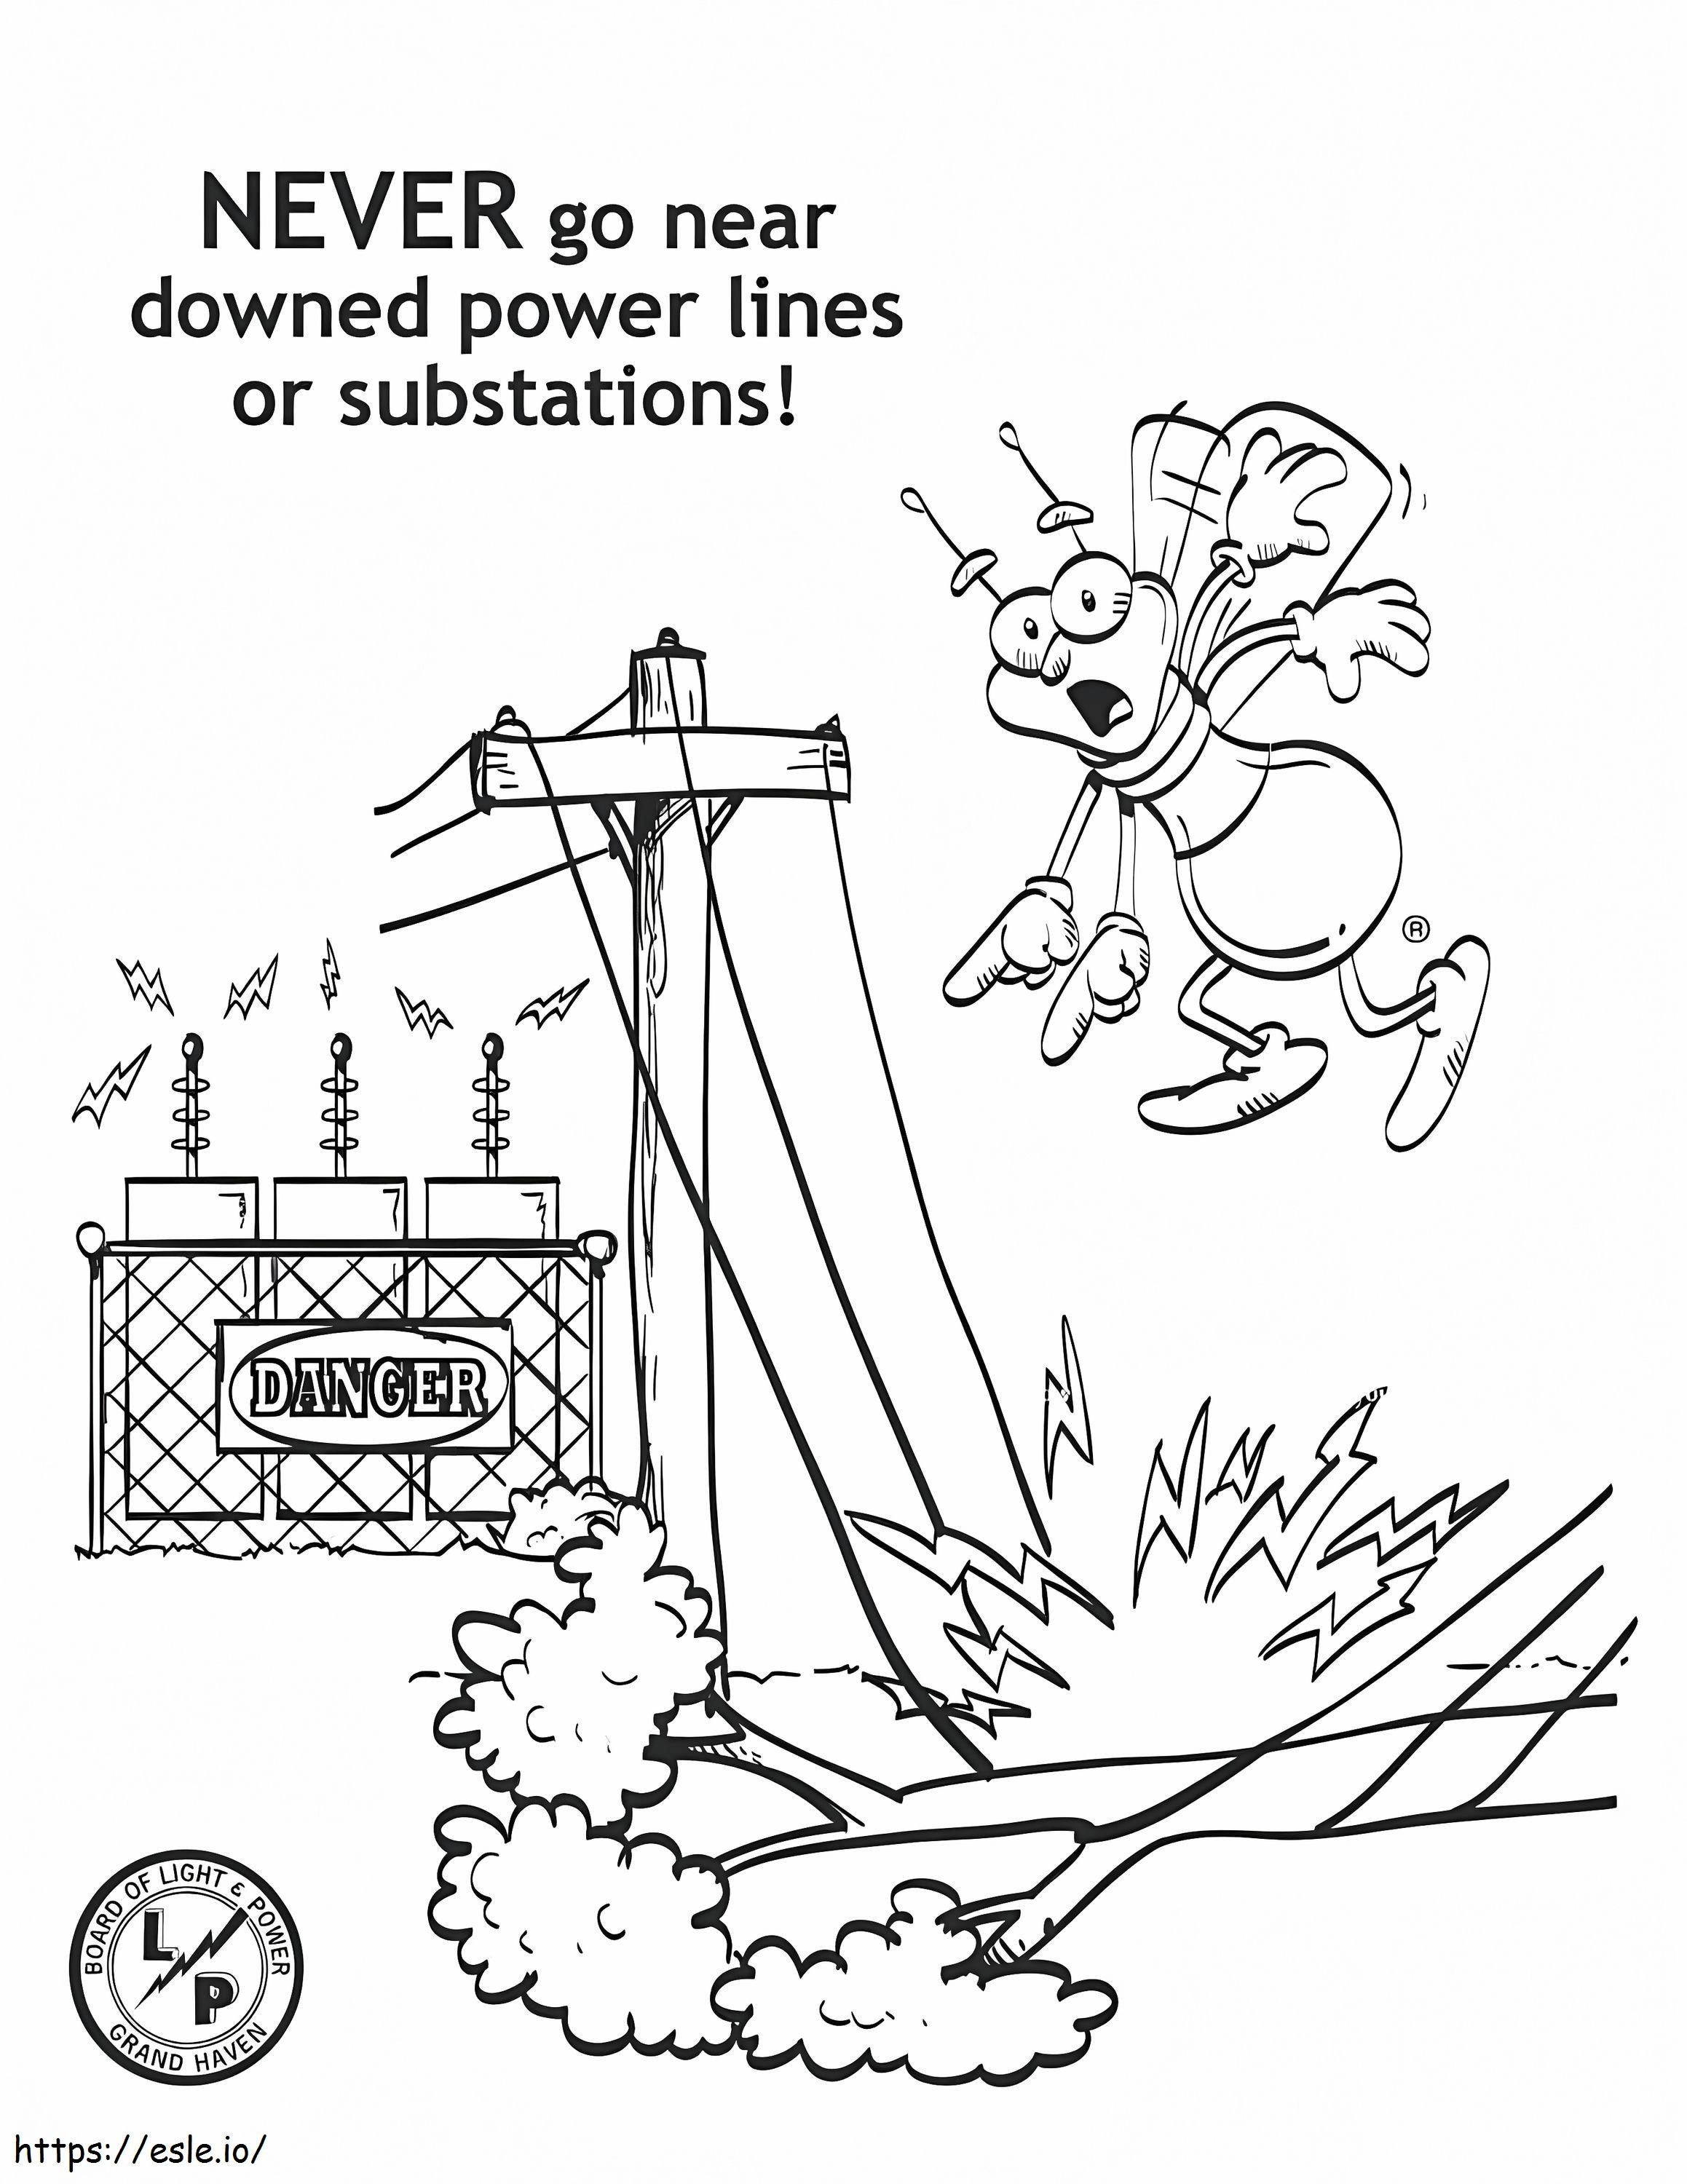 Electrical Safety 6 coloring page